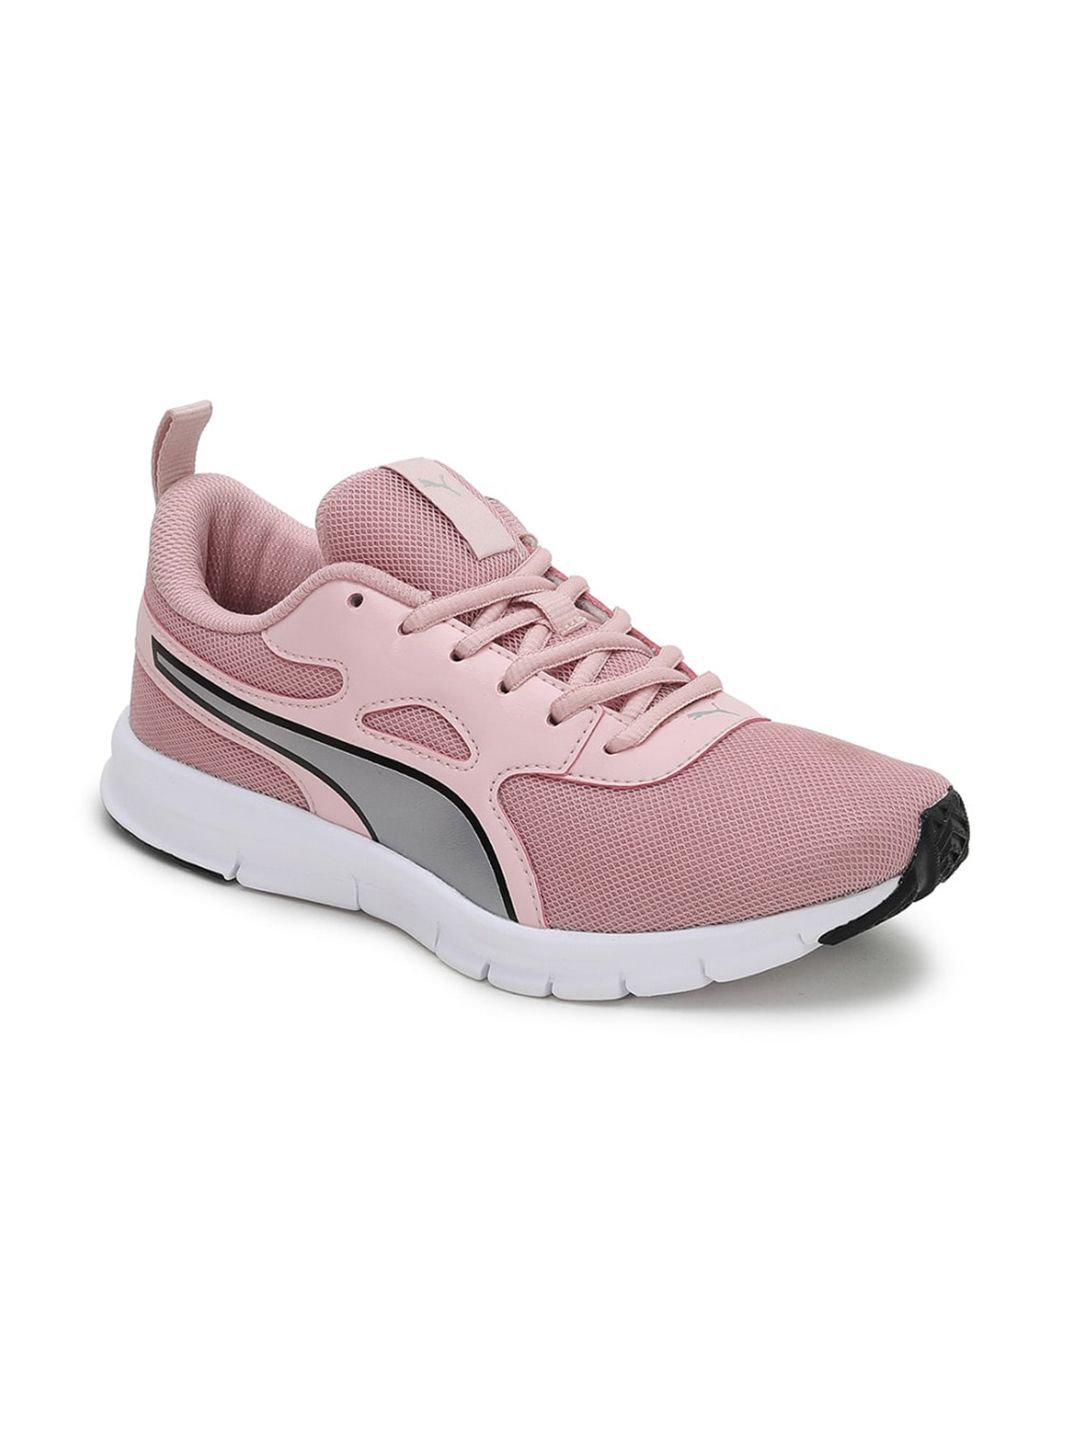 Puma Women Pink Woven Design Sneakers Price in India